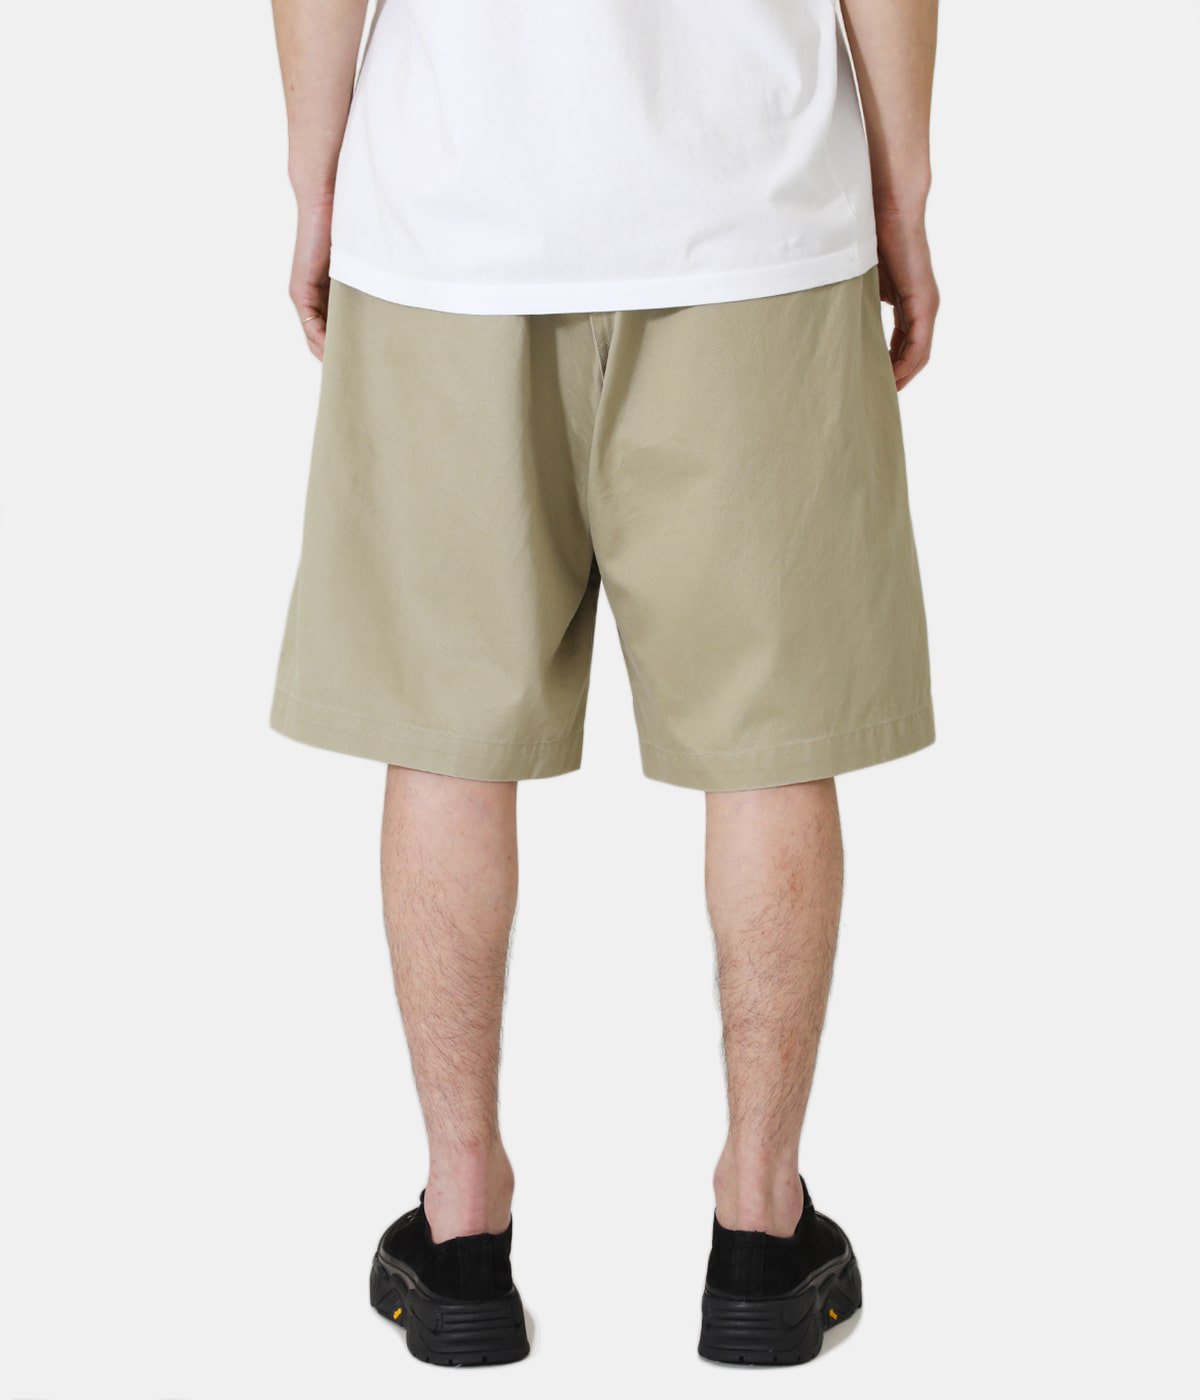 WEAPON WIDE SHORTS